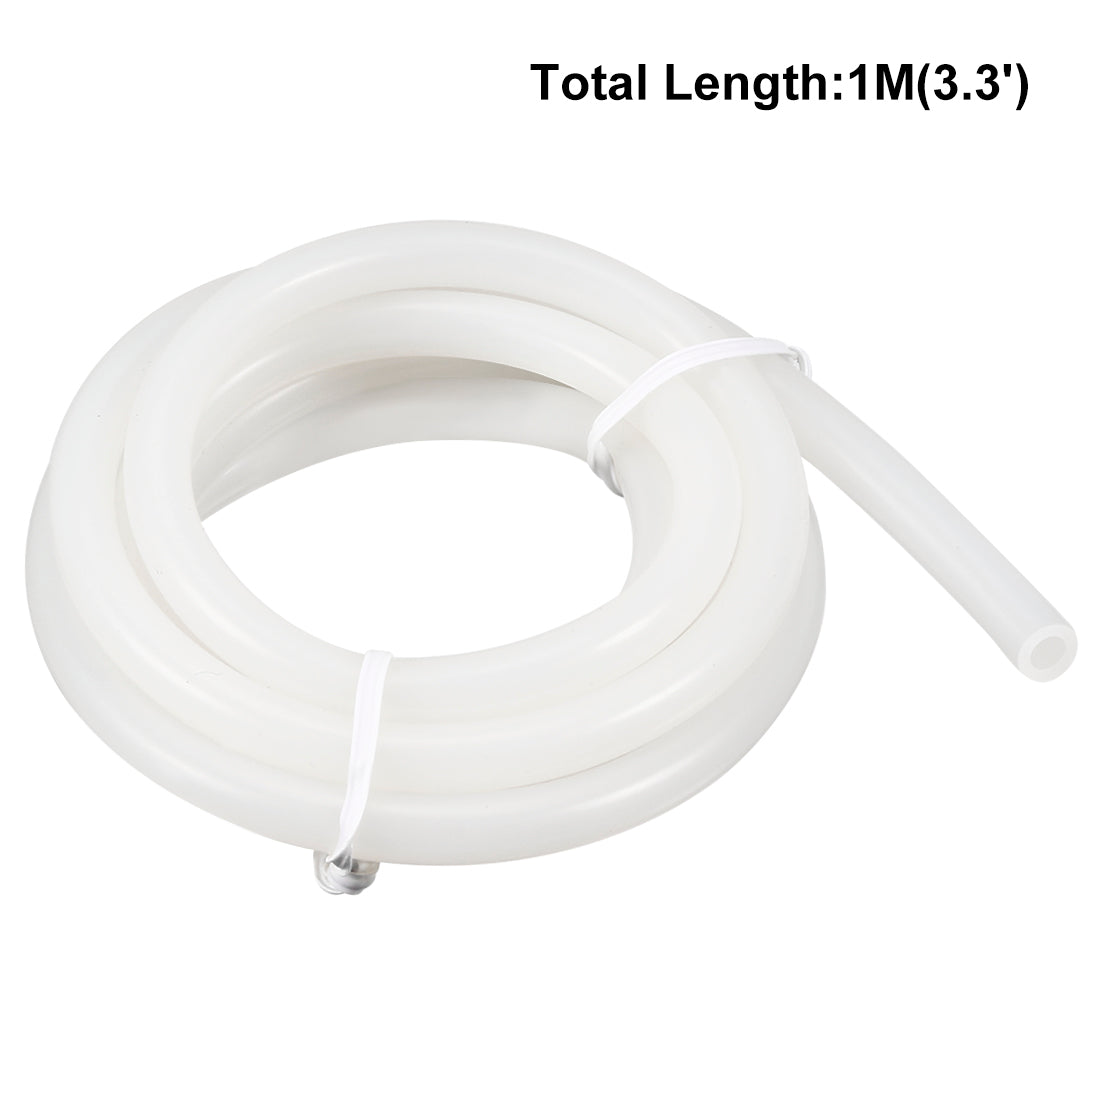 uxcell Uxcell Silicone Tube mm ID X mm OD 1 Meter Flexible Silicone Rubber Tubing Water Air Hose Pipe for Pump Transfer